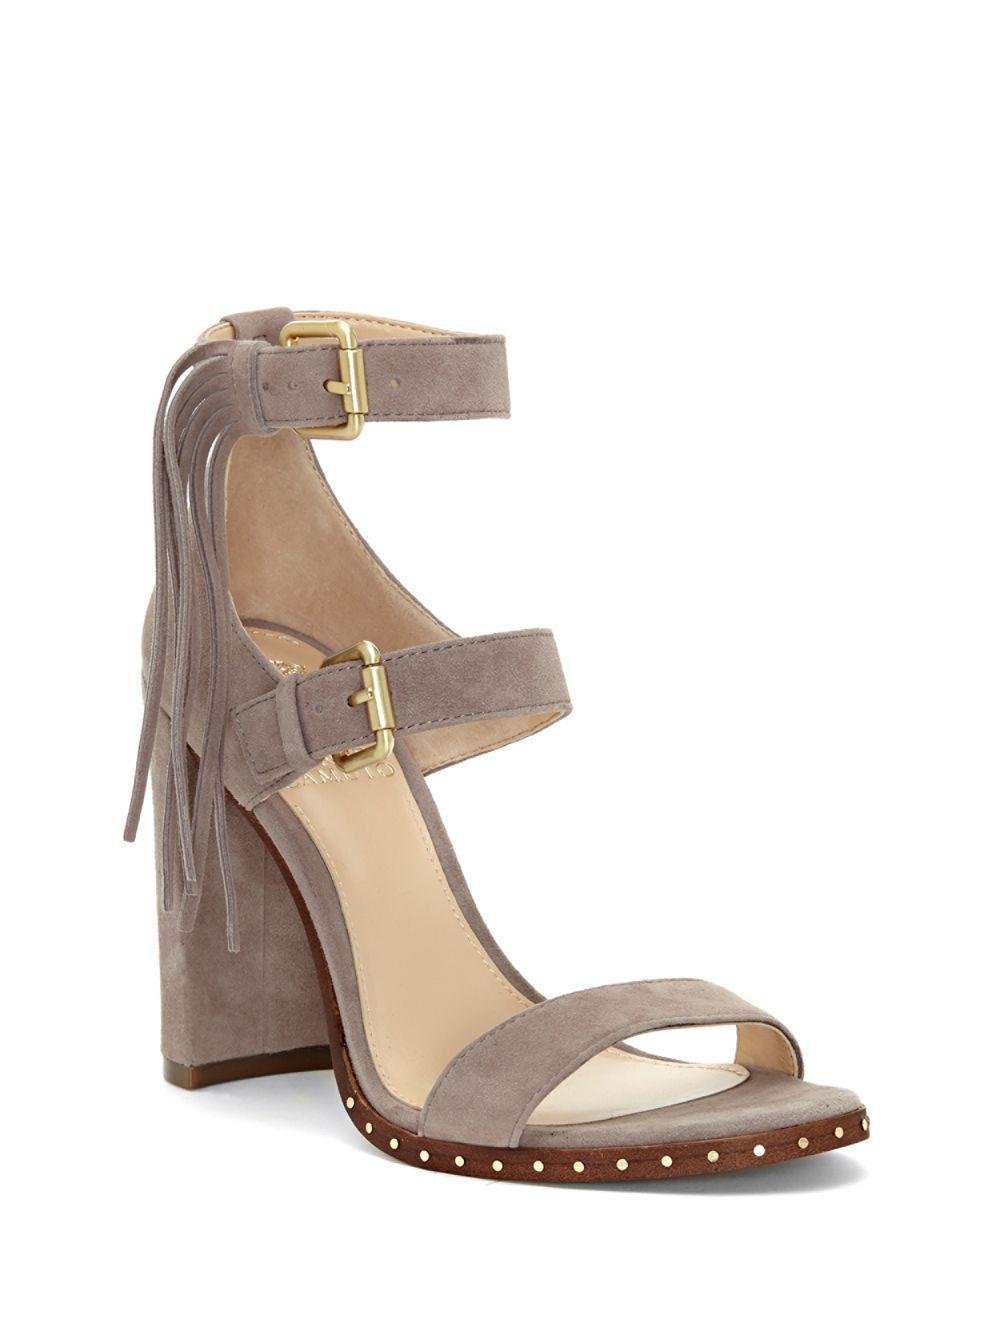 bionica gilford wedge bootie